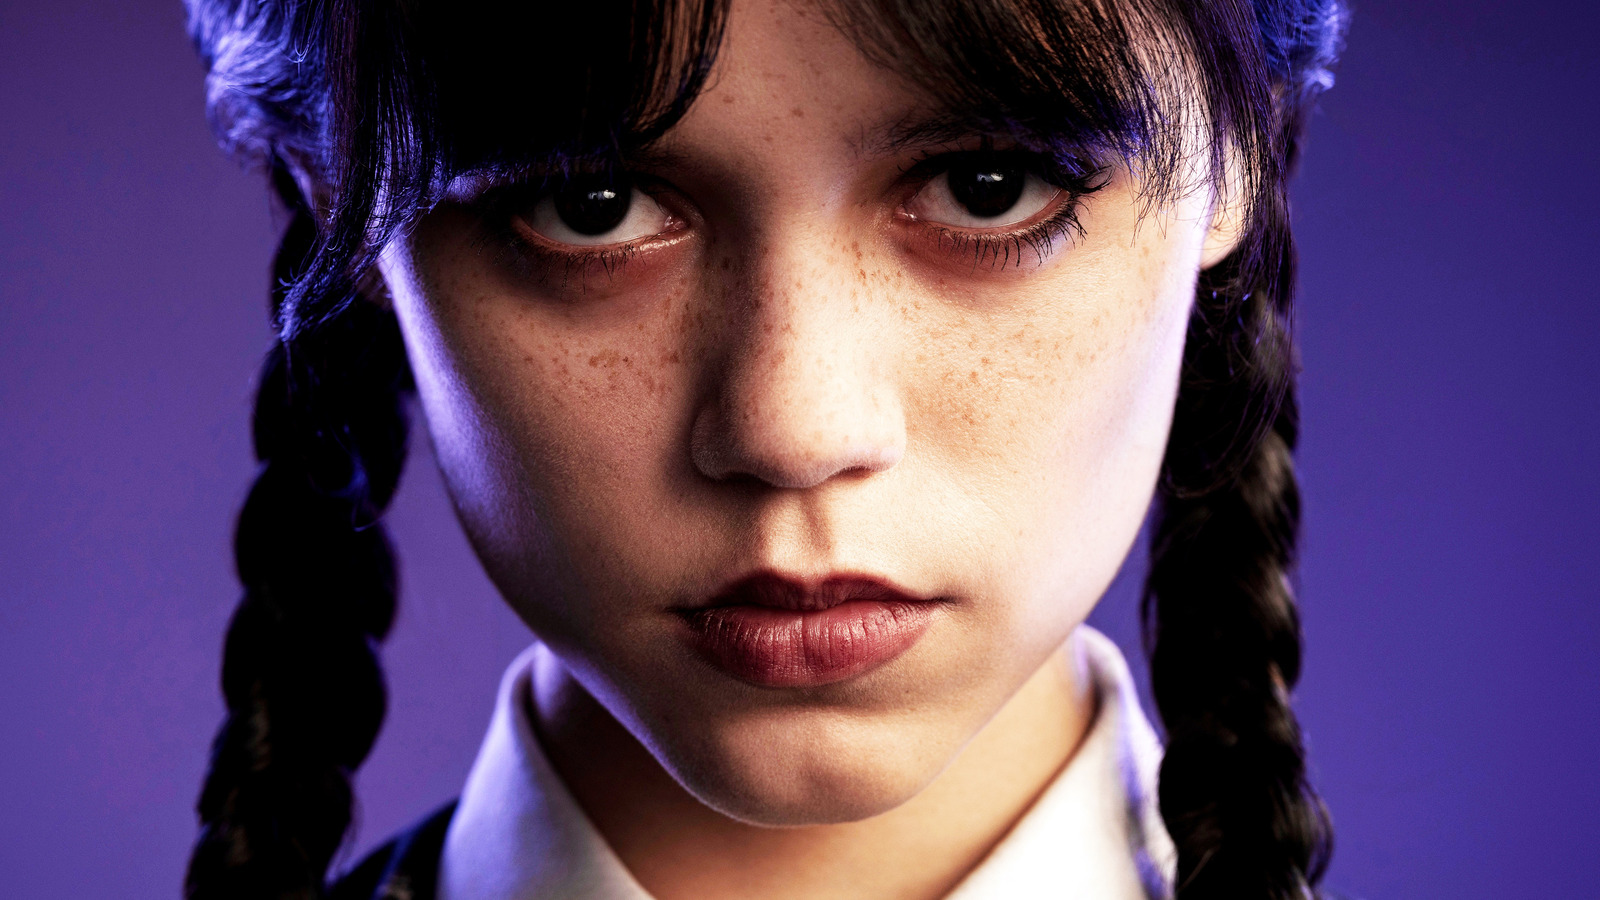 Wednesday Addams on Netflix: Why does she continue to matter?